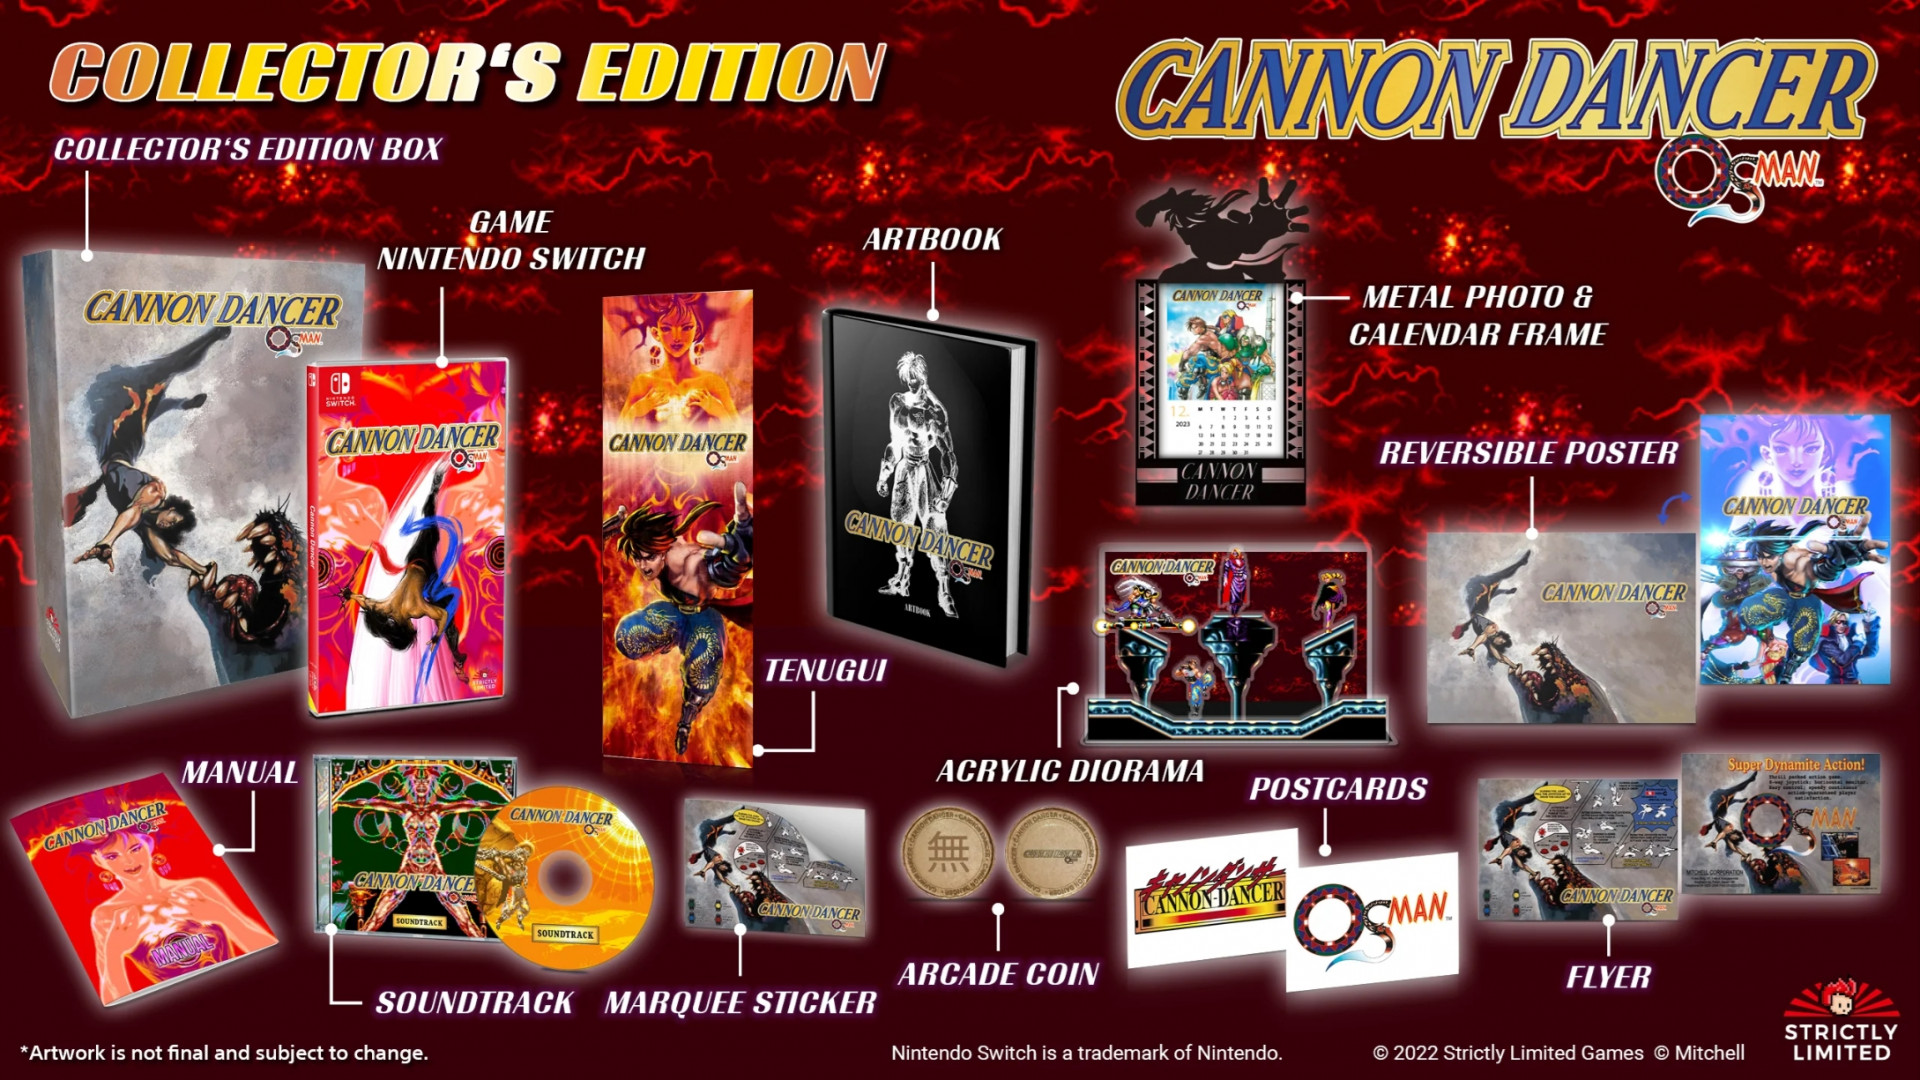 Cannon Dancer: Osman - Collector's Edition (Strictly Limited) (Switch), Atlus